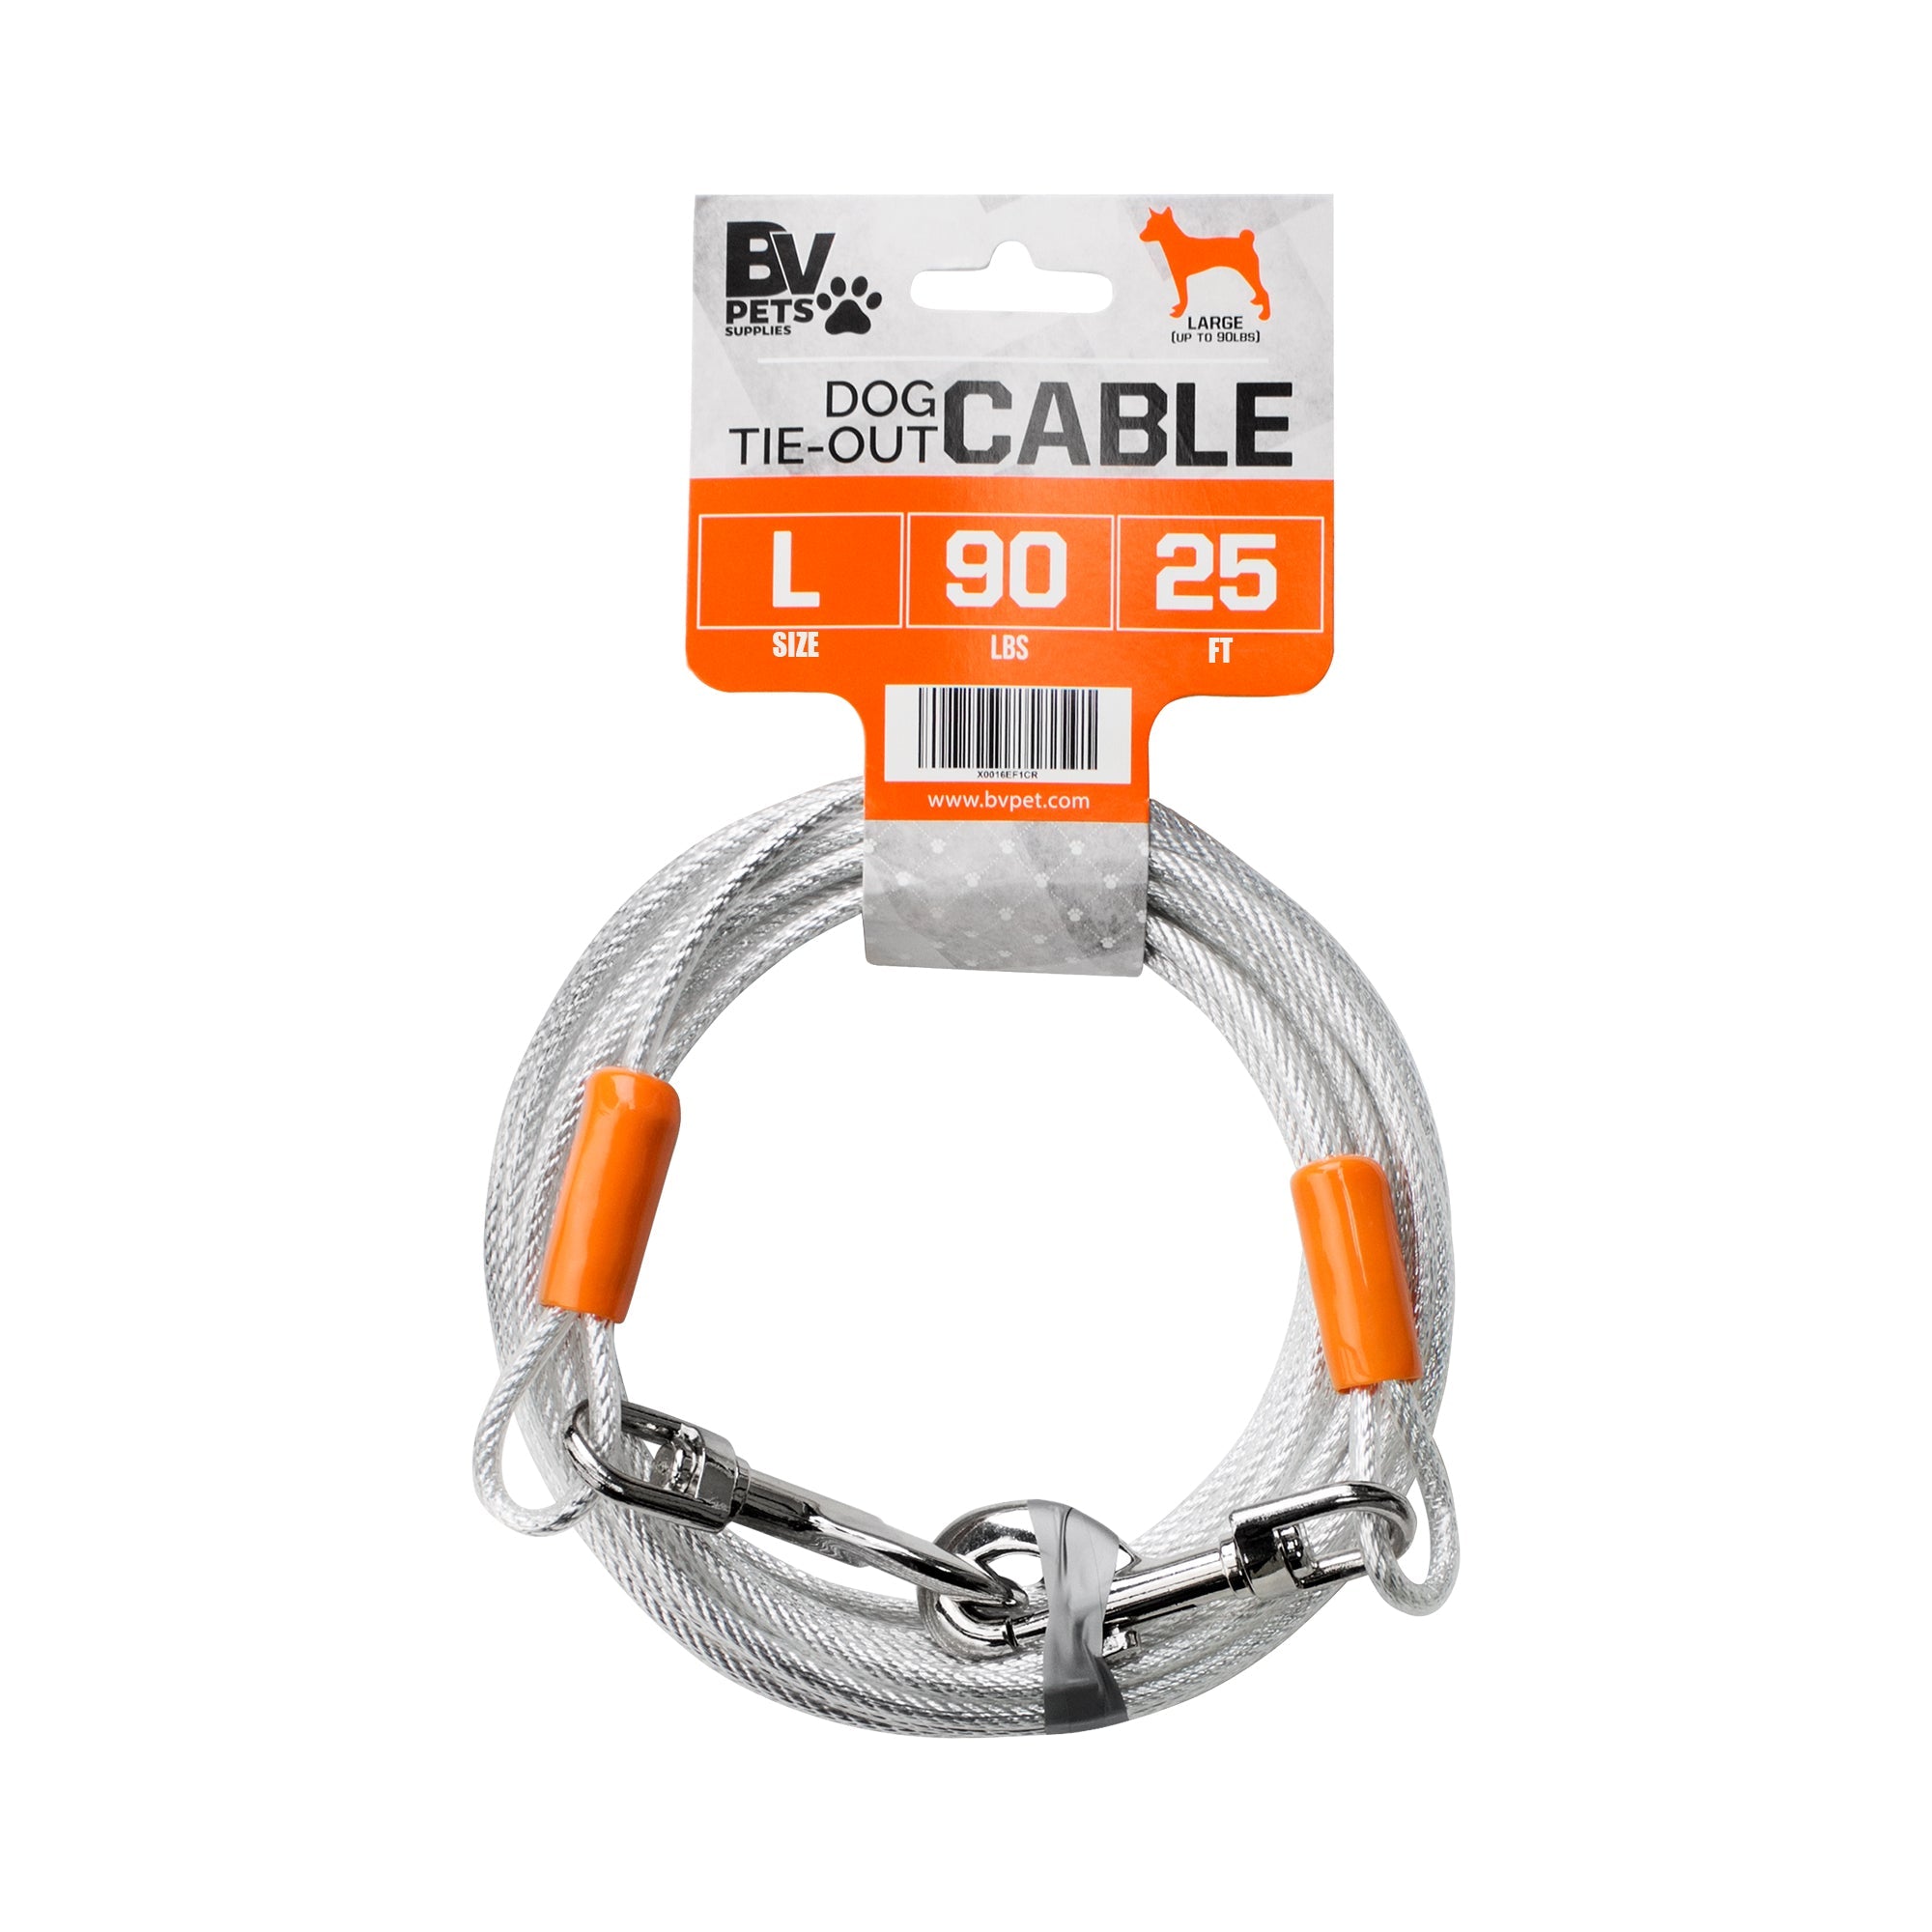 BV Pet Reflective Tie Out Cable - for Dogs Up to 90Lbs - 25ft